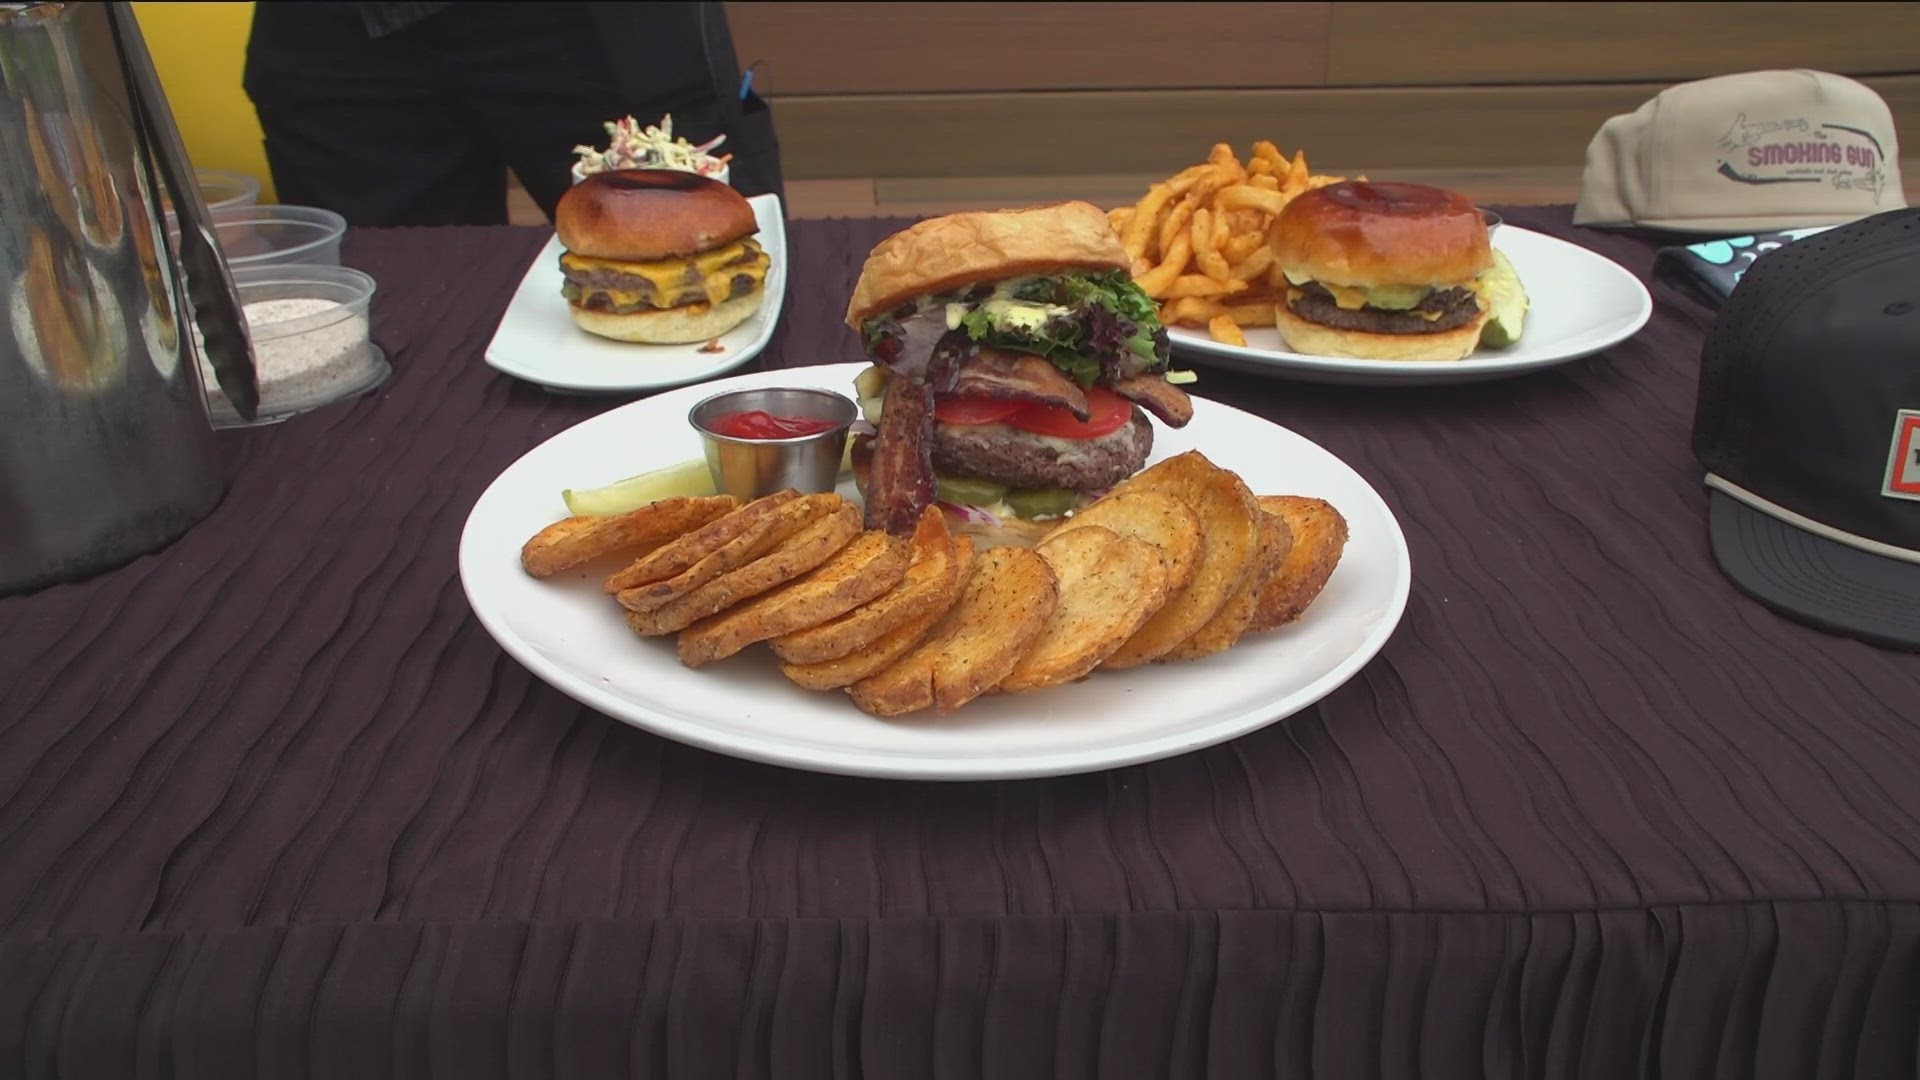 Today is National Burger Day and to celebrate, we spoke to three local restaurants, the Smoking Gun, the Original 40 Brewing Co., and Miss B's Coconut Club.